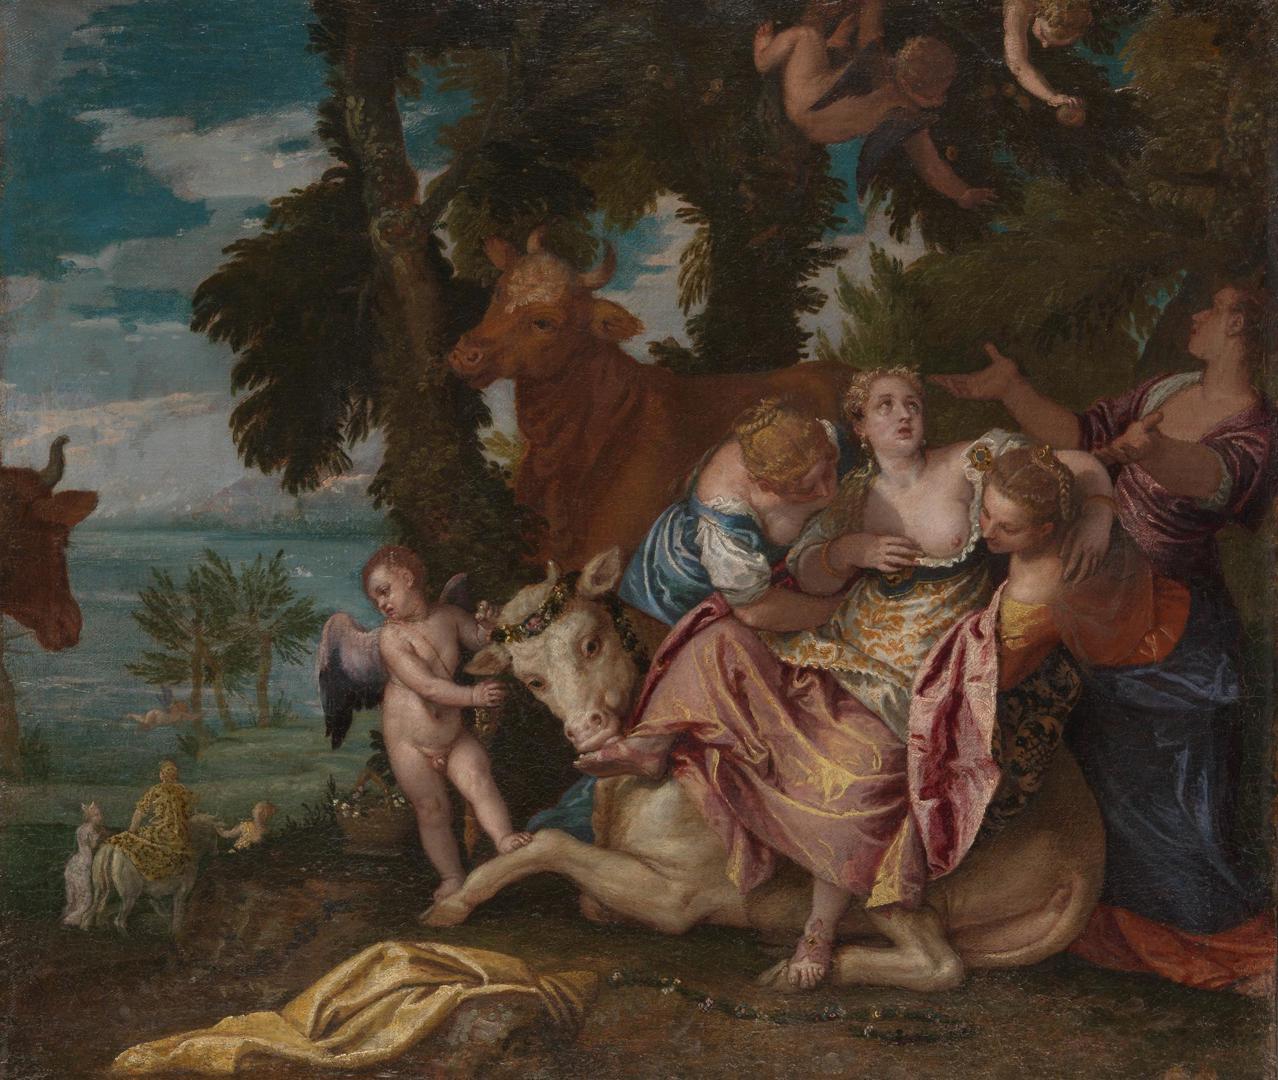 The Rape of Europa by Paolo Veronese